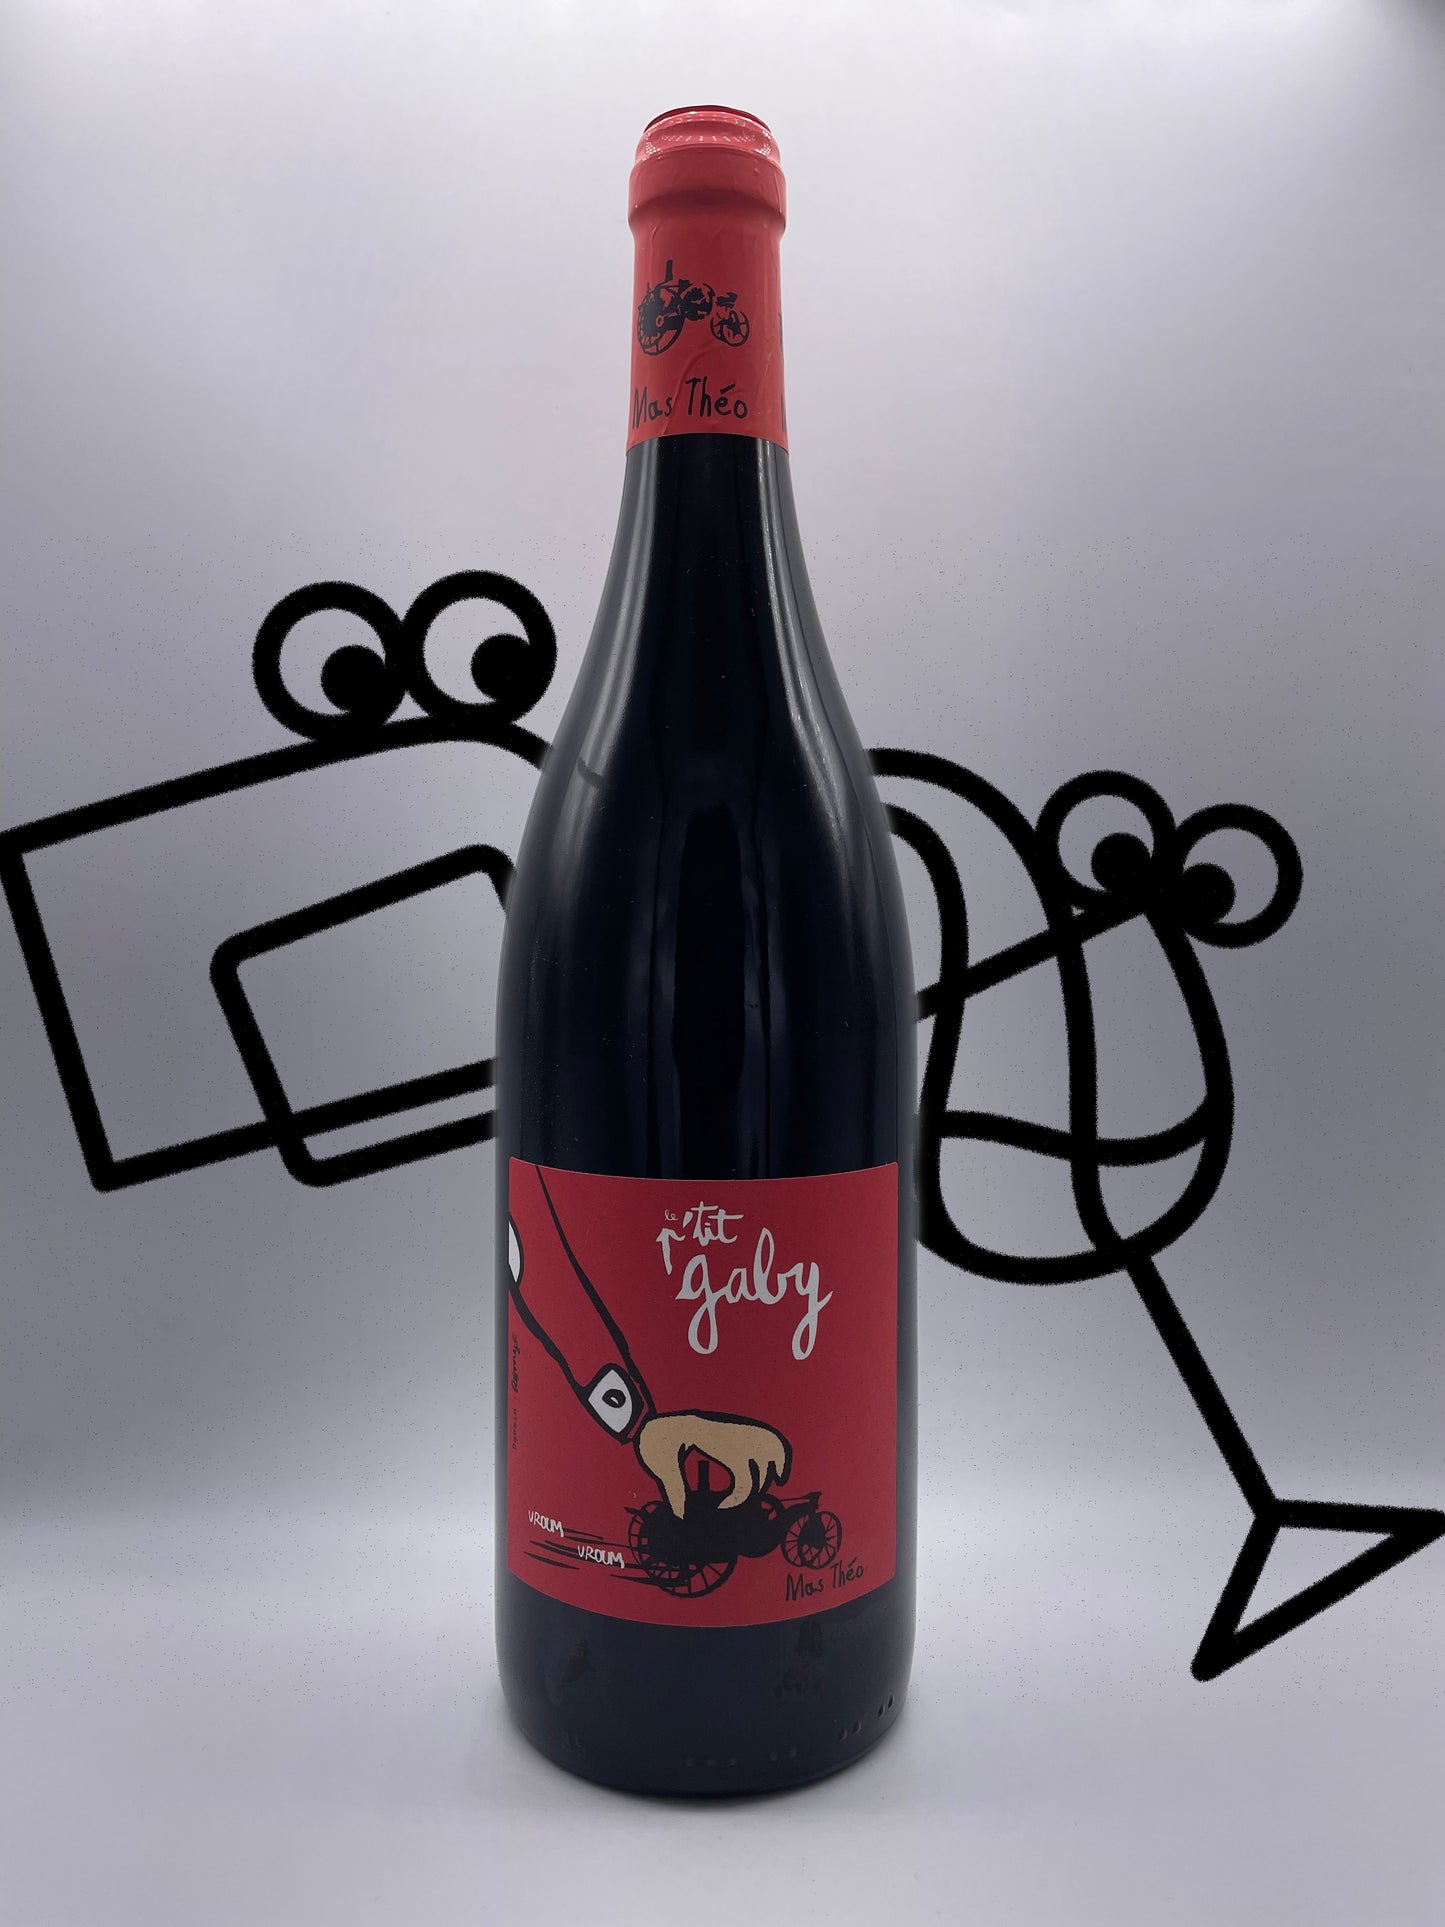 Mas Théo 'P'tit Gaby' 2019 Southern Rhone Valley, France Williston Park Wines